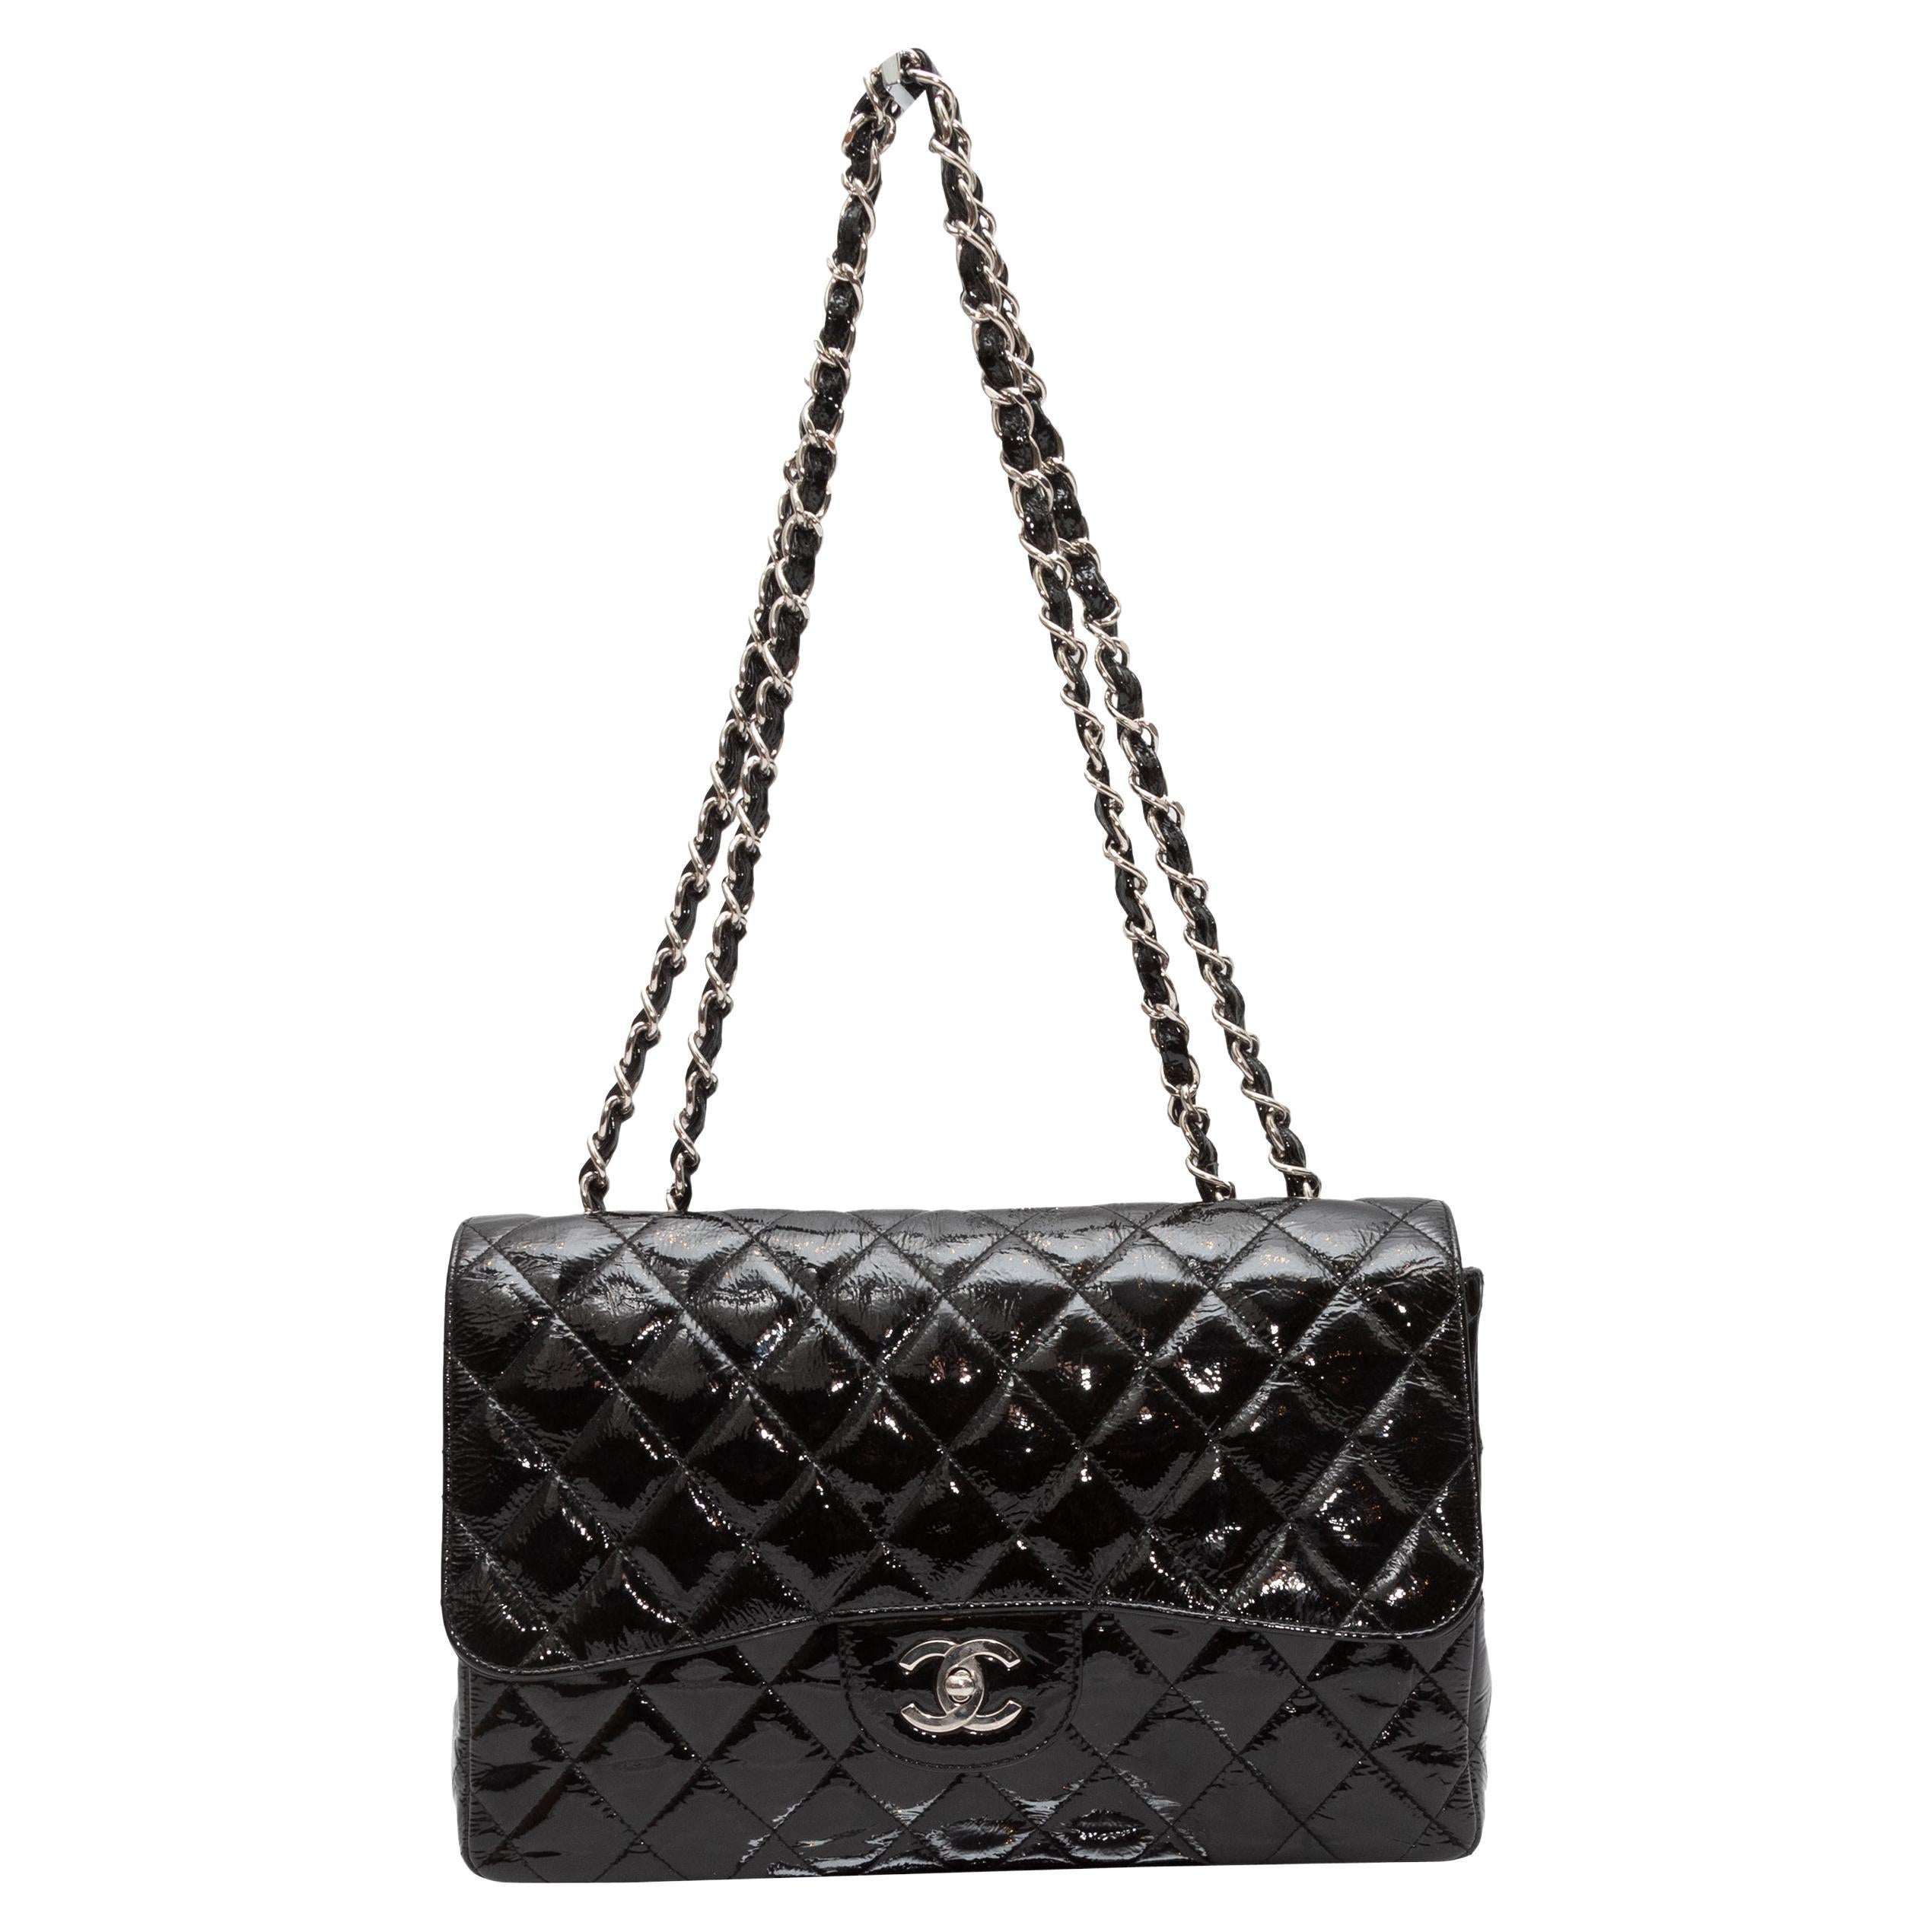 A BURGUNDY PATENT LEATHER MEDIUM DOUBLE FLAP BAG, CHANEL, 2008-2009